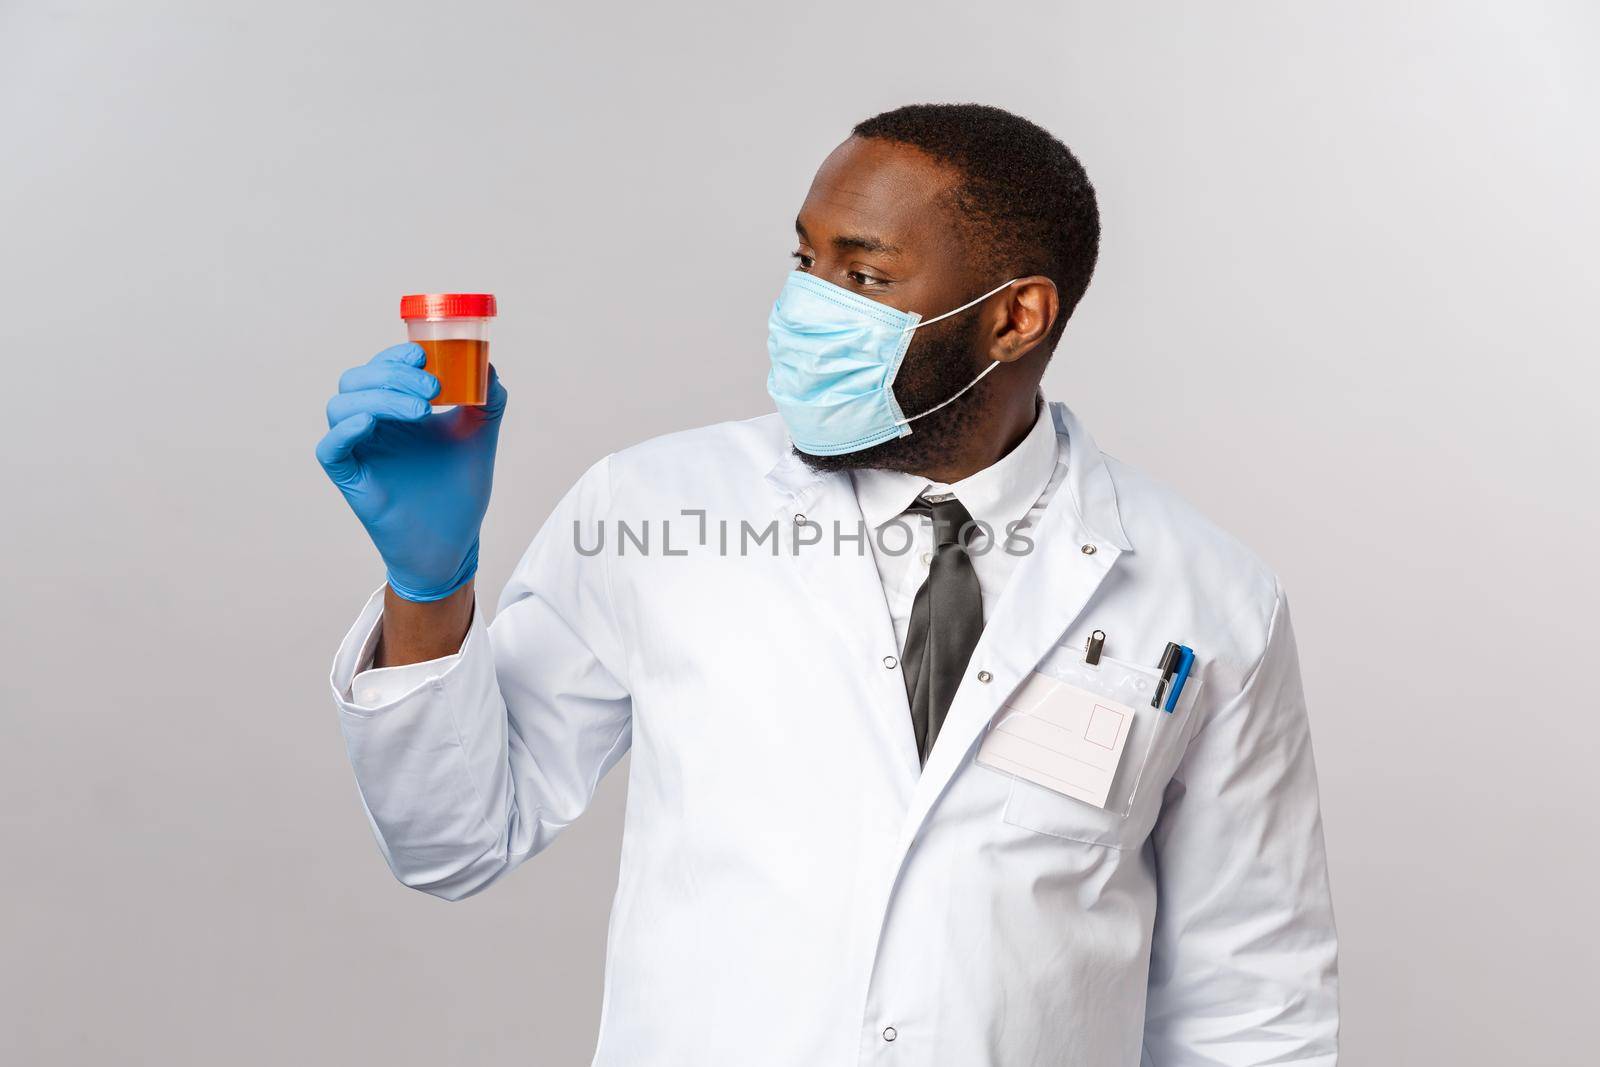 Covid19, pandemic and healthcare concept. Impressed and curious african-american doctor studying patient analysis, looking at urine test with intrigue, wear face mask and medical latex gloves.